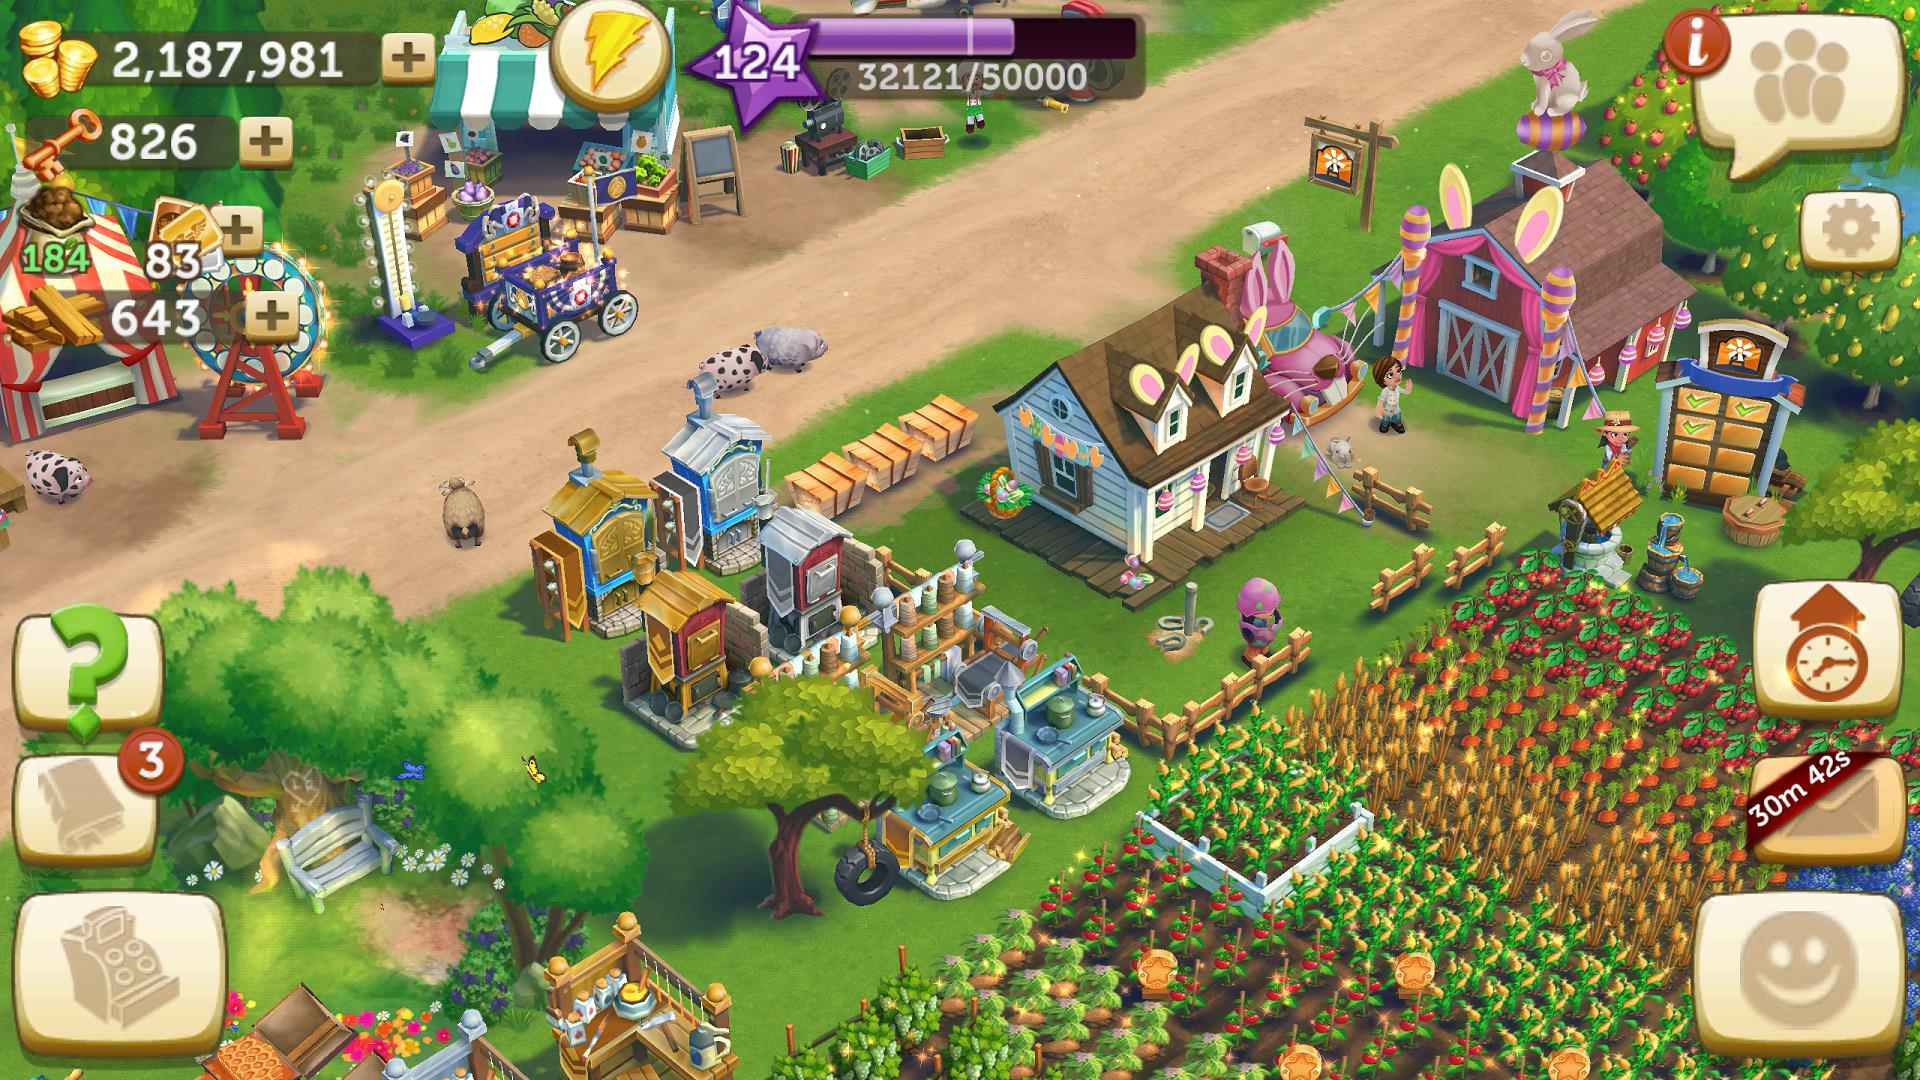 How to download farmville 2 on pc download left 4 dead 2 for free